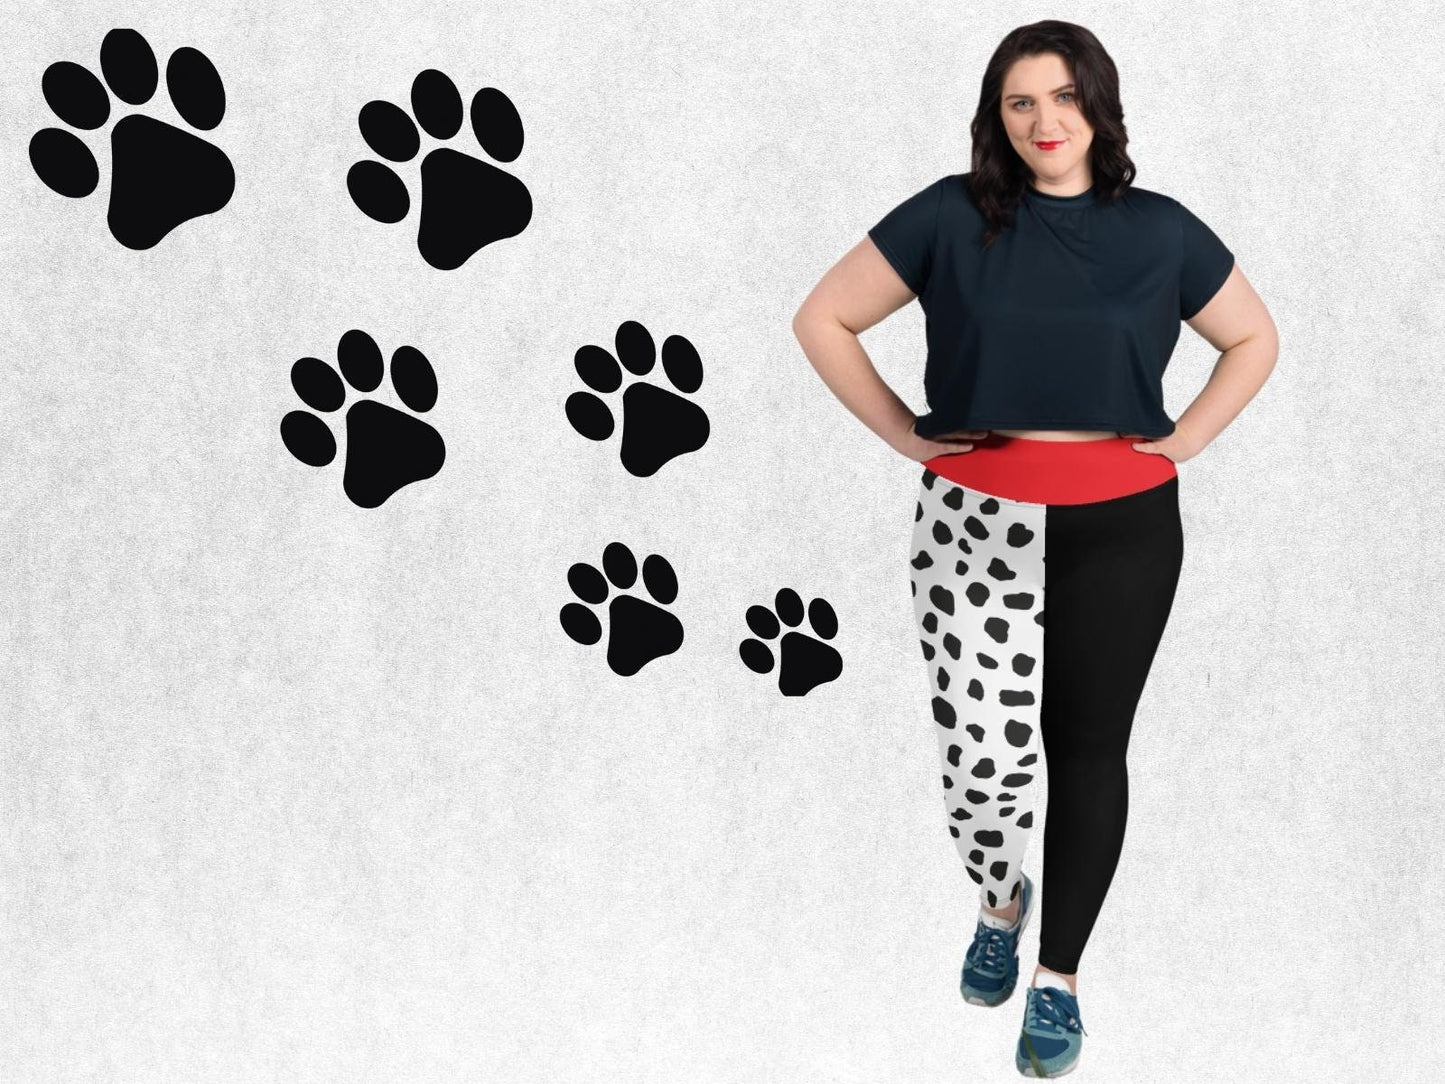 Cruel lady Plus Size Yoga Leggings, Woman Cosplay, Dalmatians, Adult Halloween Costume, Running Villain, Gift for Her, Cosplay Outfit